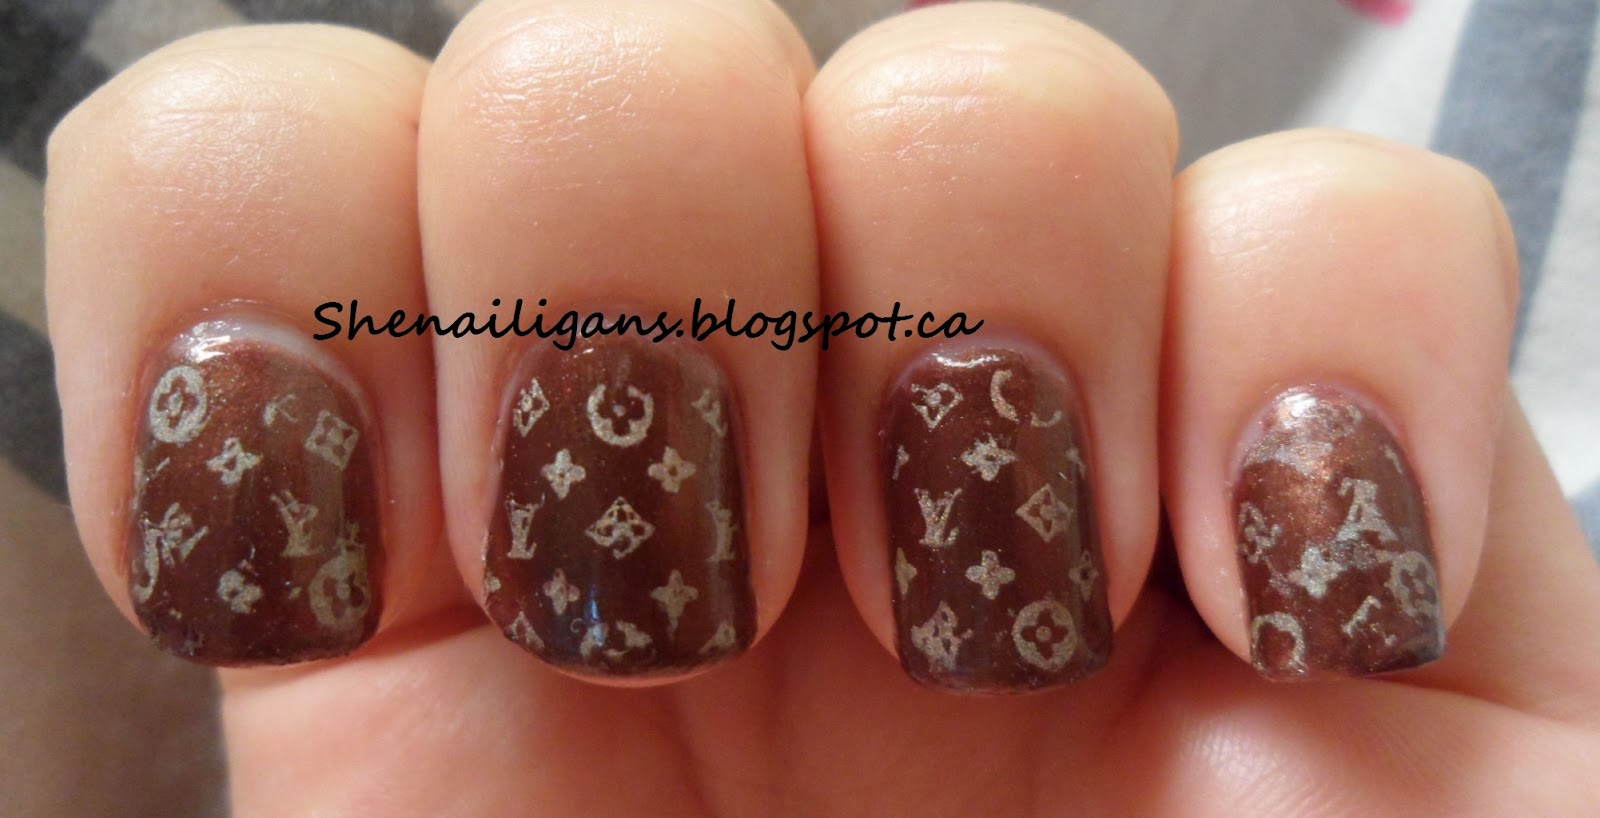 Shenailigans : My First Attempt at Nail Stamping- Awesome Louis Vuitton Nails!